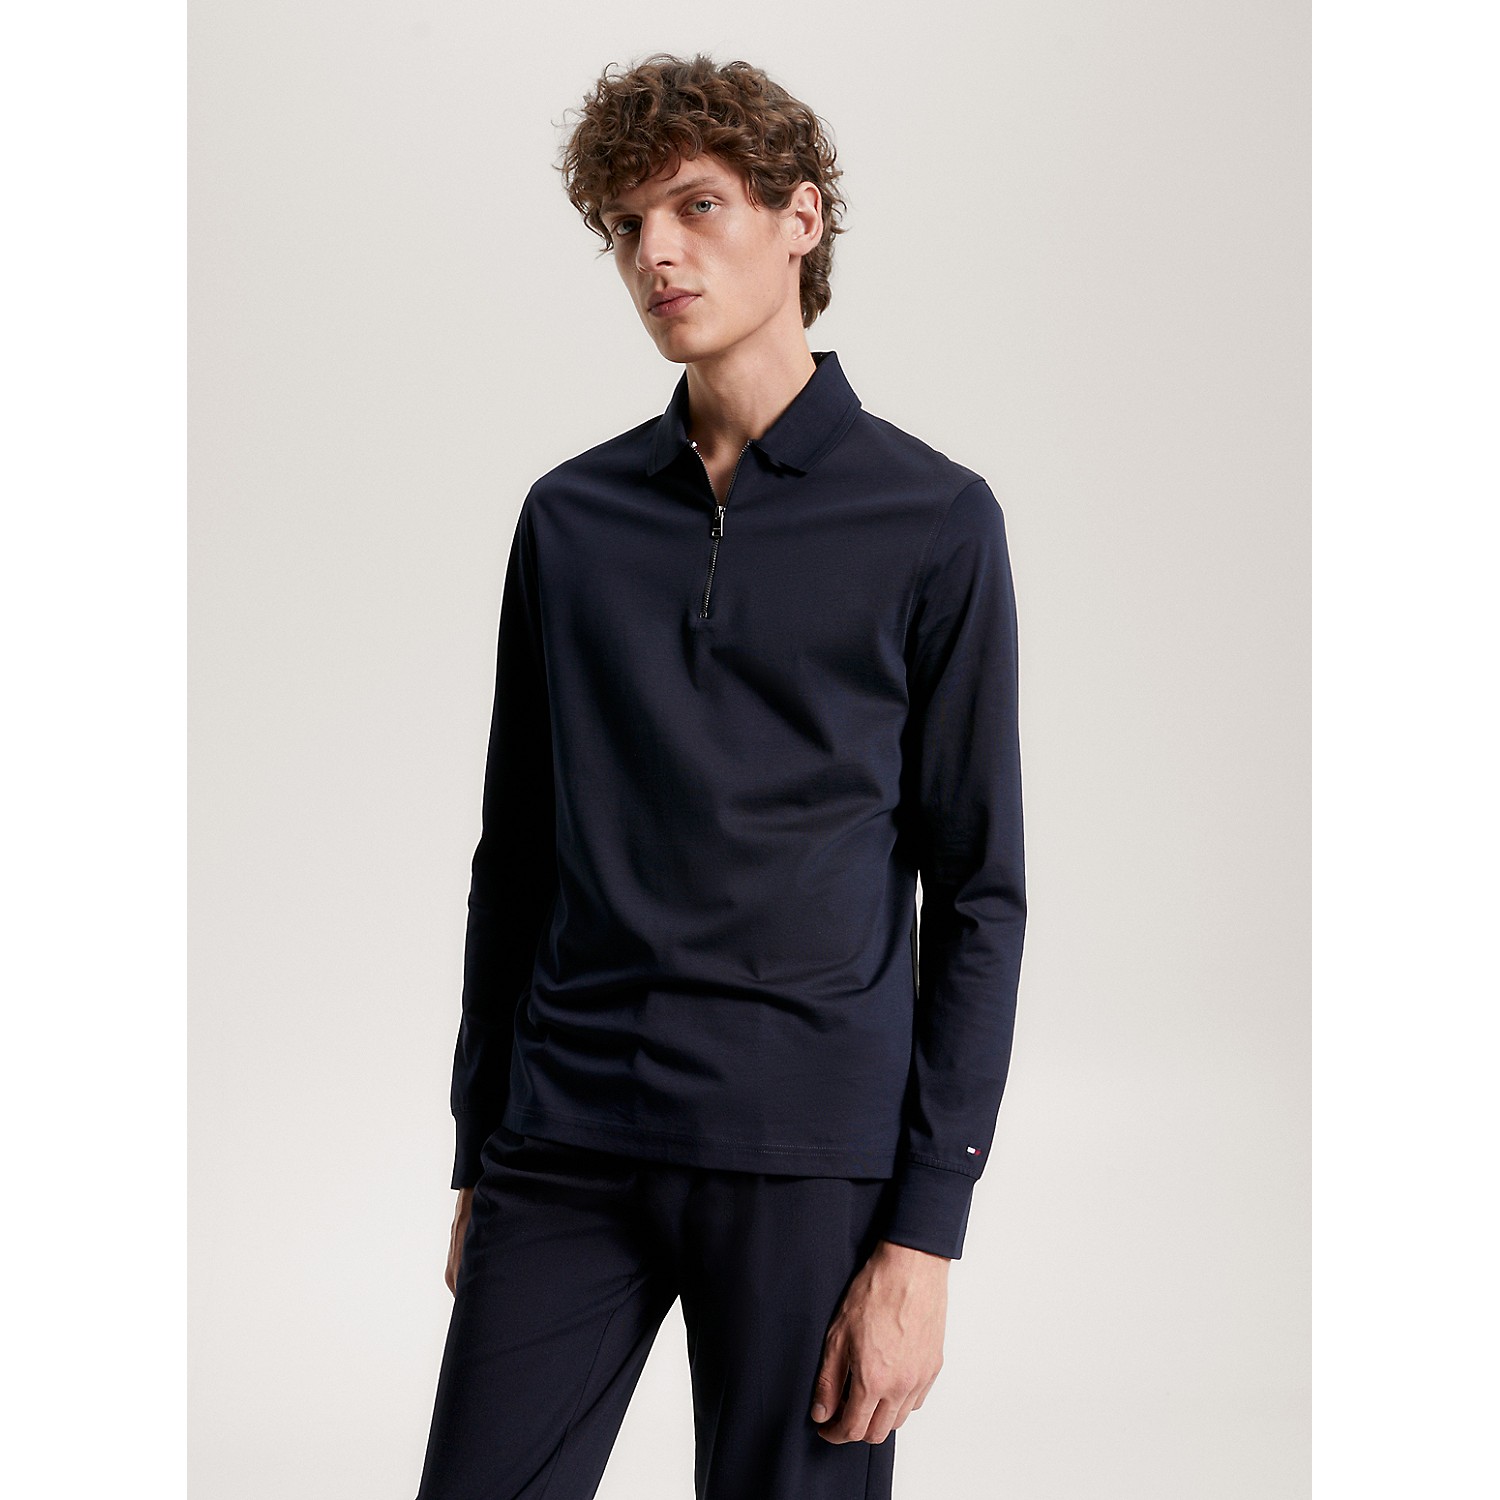 TOMMY HILFIGER Regular Fit Zip Long-Sleeve Polo